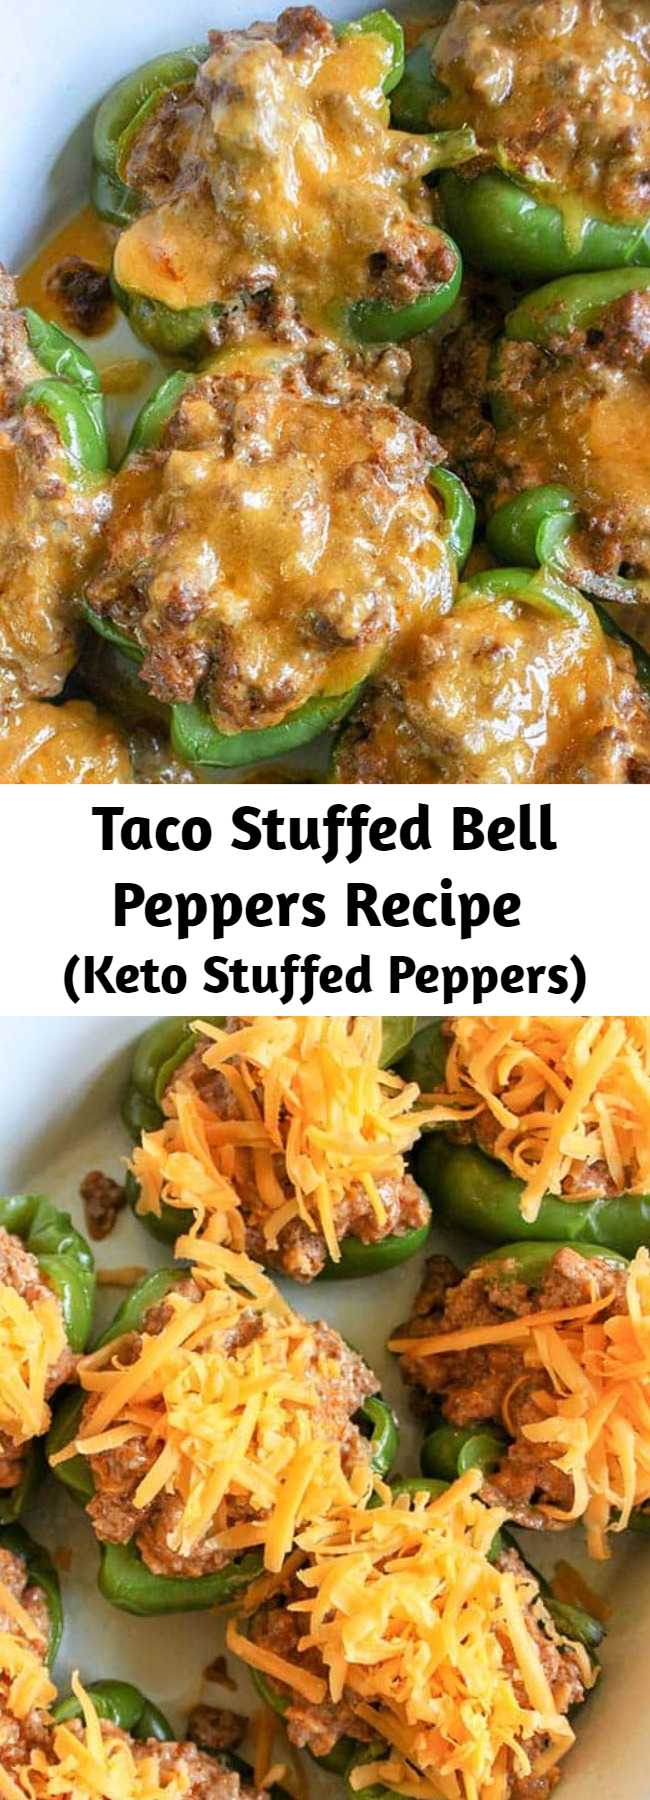 Taco Stuffed Bell Peppers Recipe (Keto Stuffed Peppers) - It's an easy to make Mexican recipe that everyone will love. Ground beef, salsa, sour cream, and melted cheese come together in a perfect healthy serving that tastes delicious! This recipe is keto, low carb, and gluten-free!